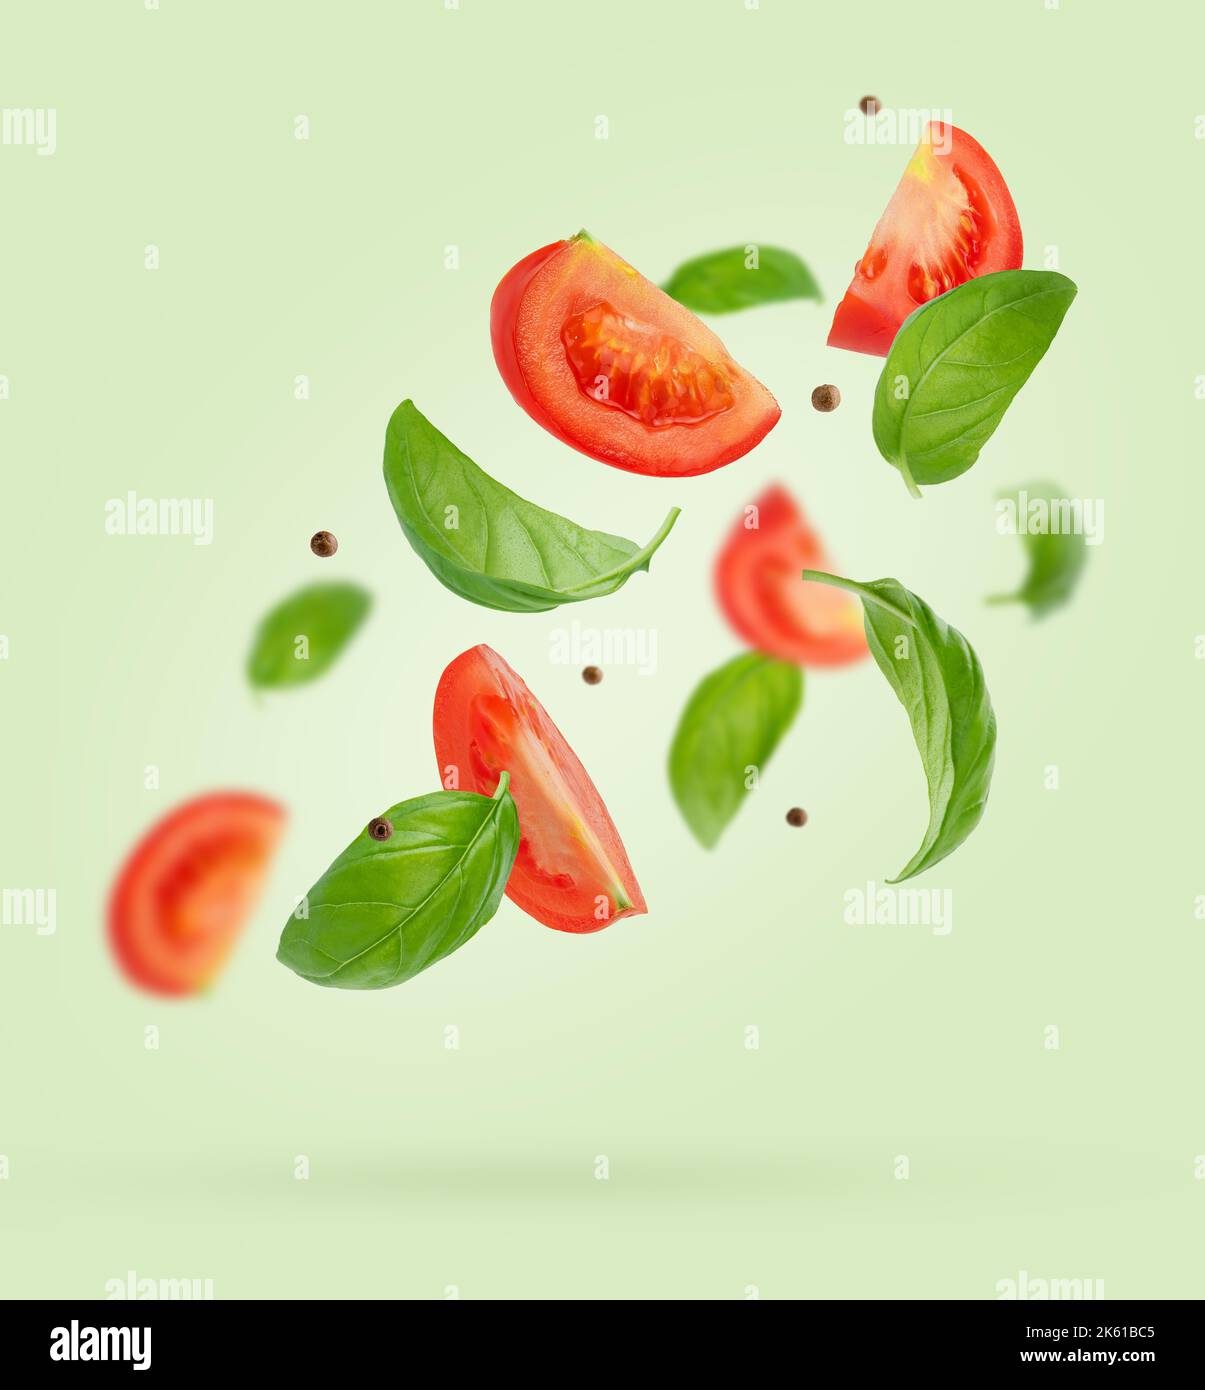 Flying ingredients of tomatoes, basil, black pepper on green background. Italian food Stock Photo